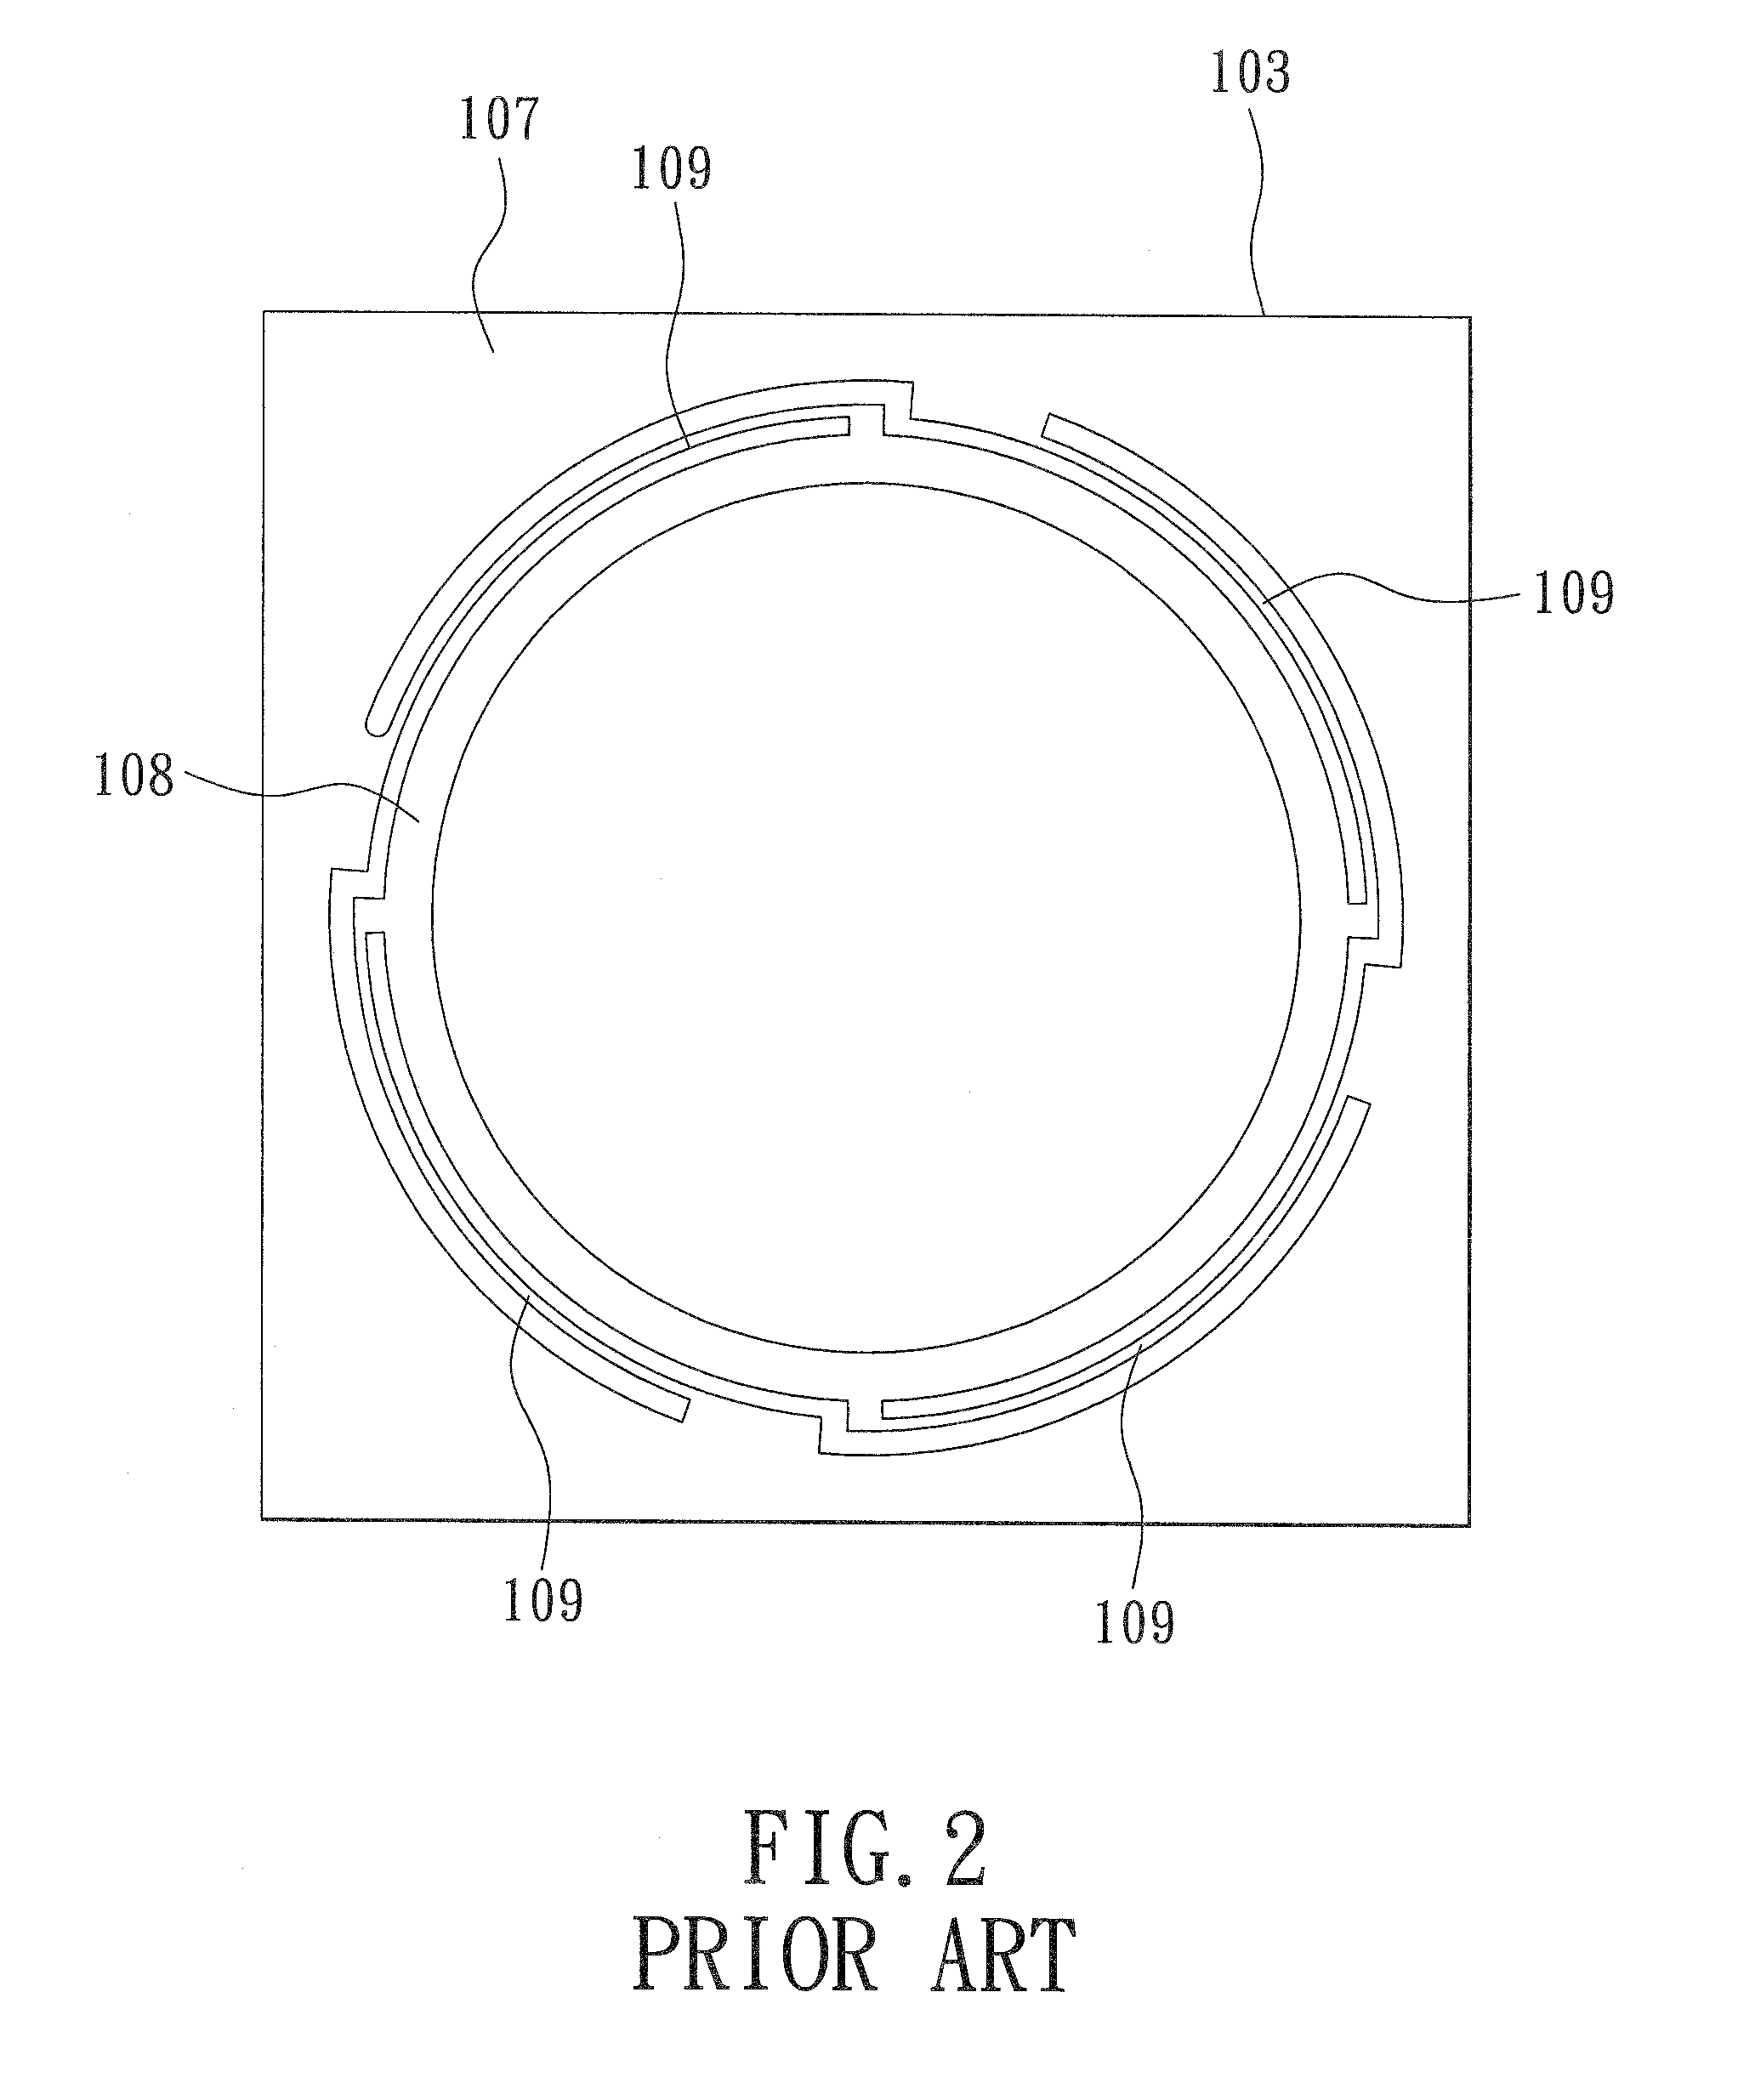 Plate spring for a voice coil motor